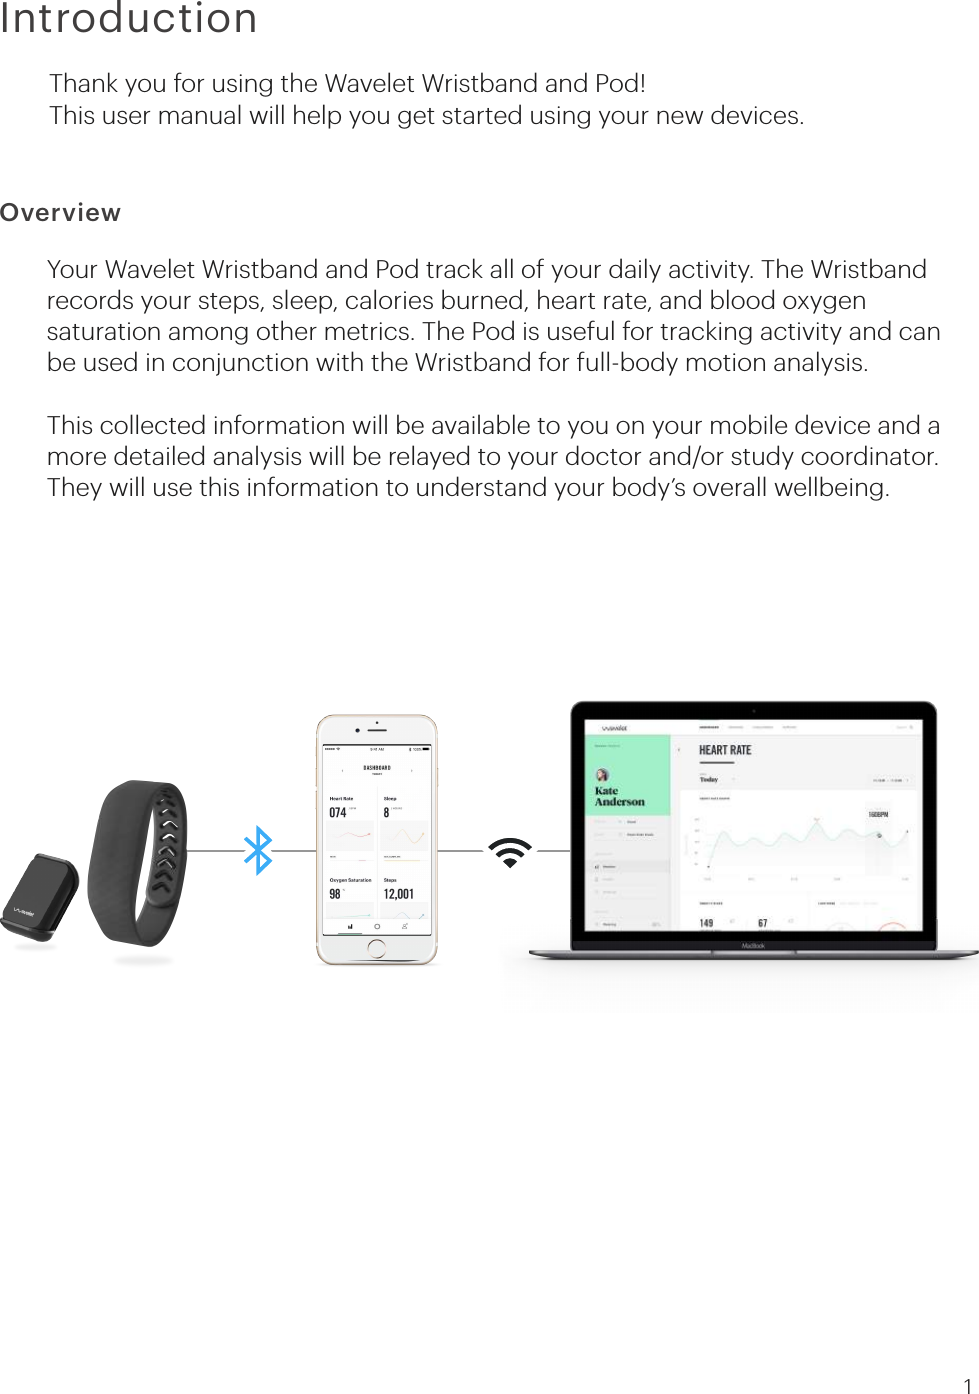 IntroductionOverviewThank you for using the Wavelet Wristband and Pod!This user manual will help you get started using your new devices.Your Wavelet Wristband and Pod track all of your daily activity. The Wristband records your steps, sleep, calories burned, heart rate, and blood oxygen saturation among other metrics. The Pod is useful for tracking activity and can be used in conjunction with the Wristband for full-body motion analysis.  This collected information will be available to you on your mobile device and a more detailed analysis will be relayed to your doctor and/or study coordinator. They will use this information to understand your body’s overall wellbeing. 1